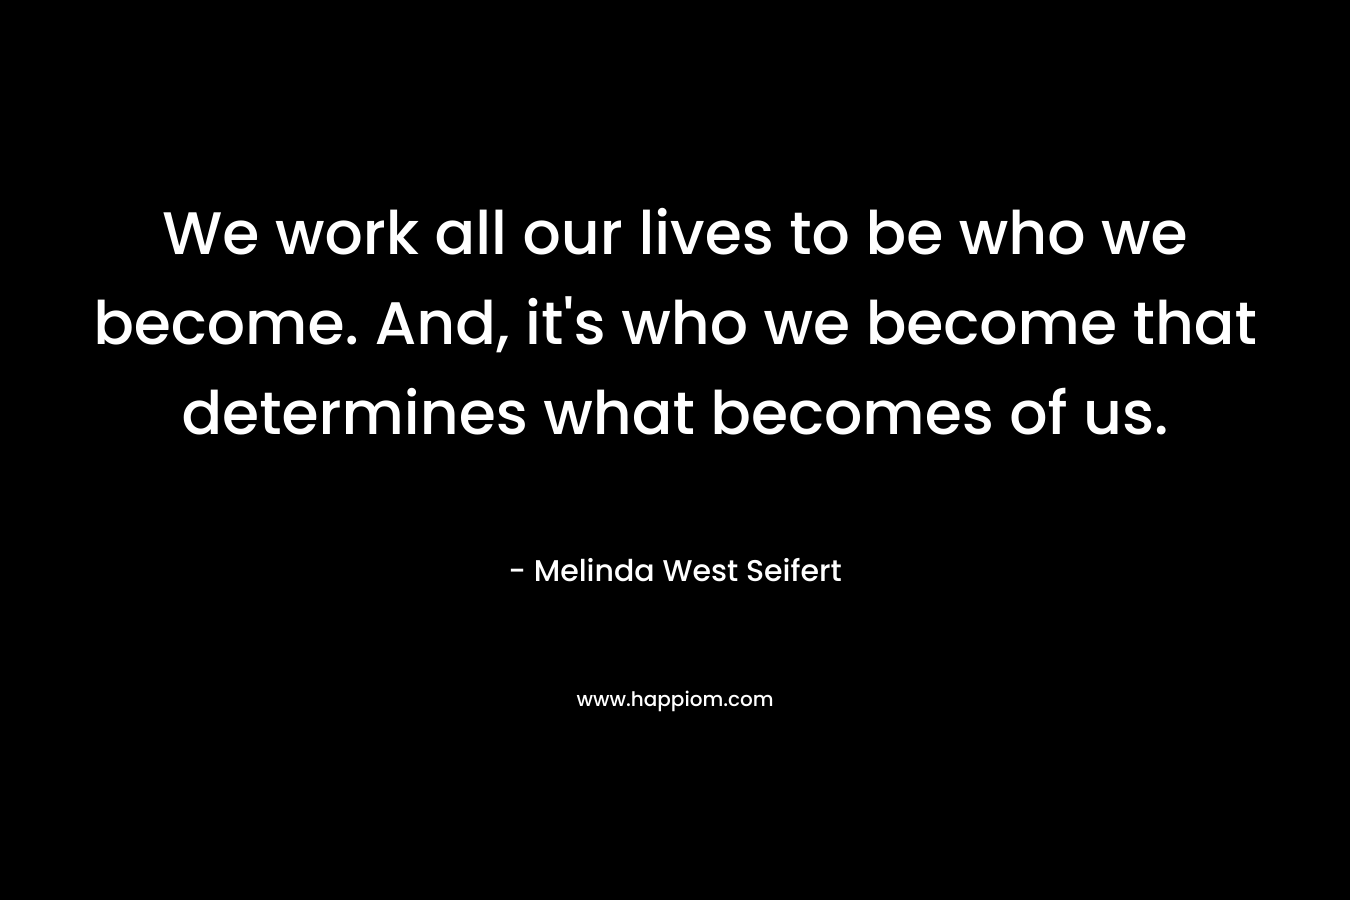 We work all our lives to be who we become. And, it's who we become that determines what becomes of us.